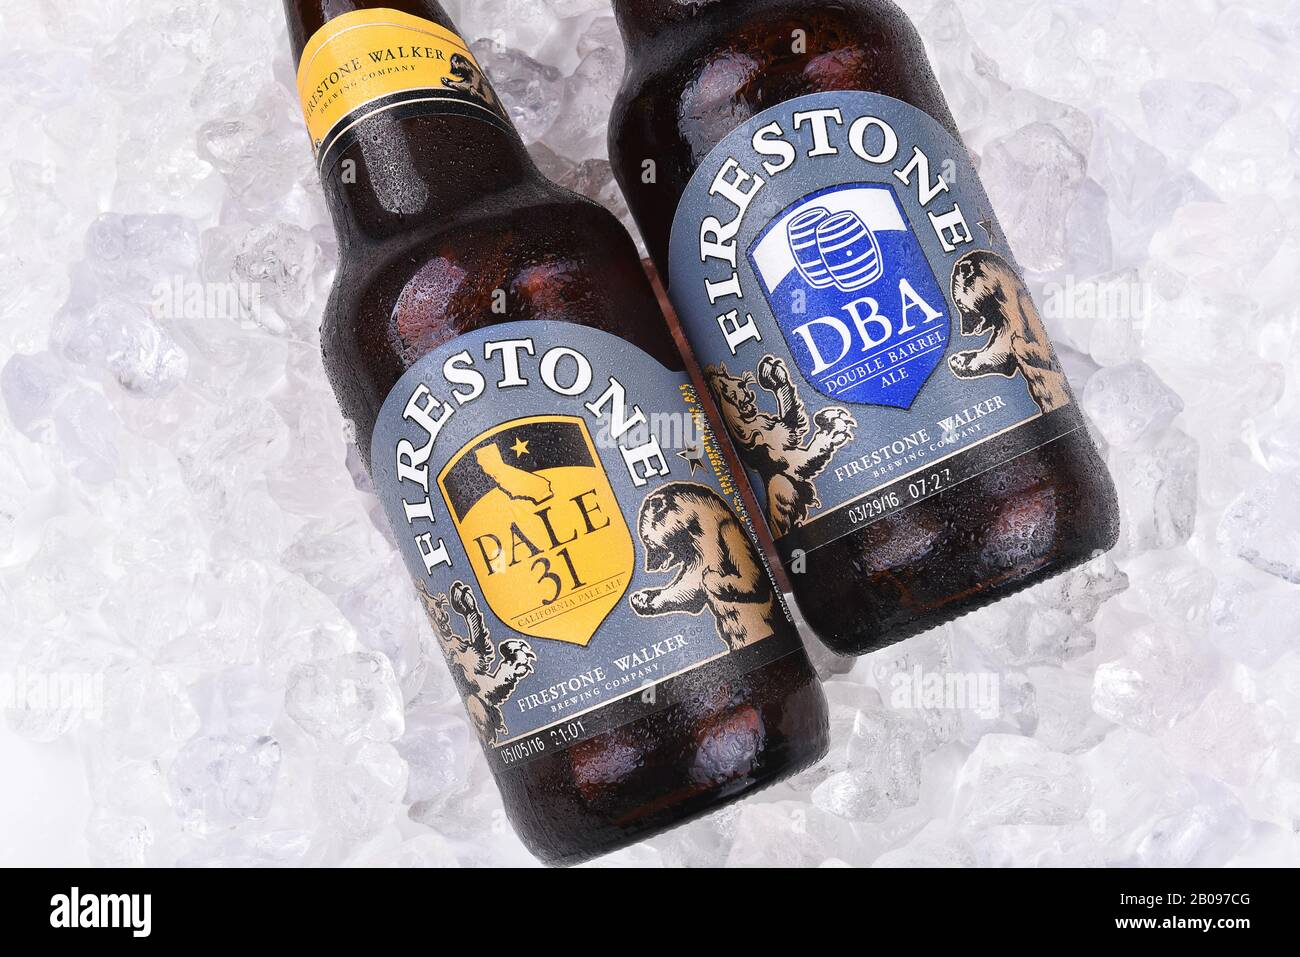 IRVINE, CALIFORNIA - AUGUST 26, 2016: Firestone Ales on Ice.f Firestone Walker is Californias fourth largest craft brewery and is known for producing Stock Photo